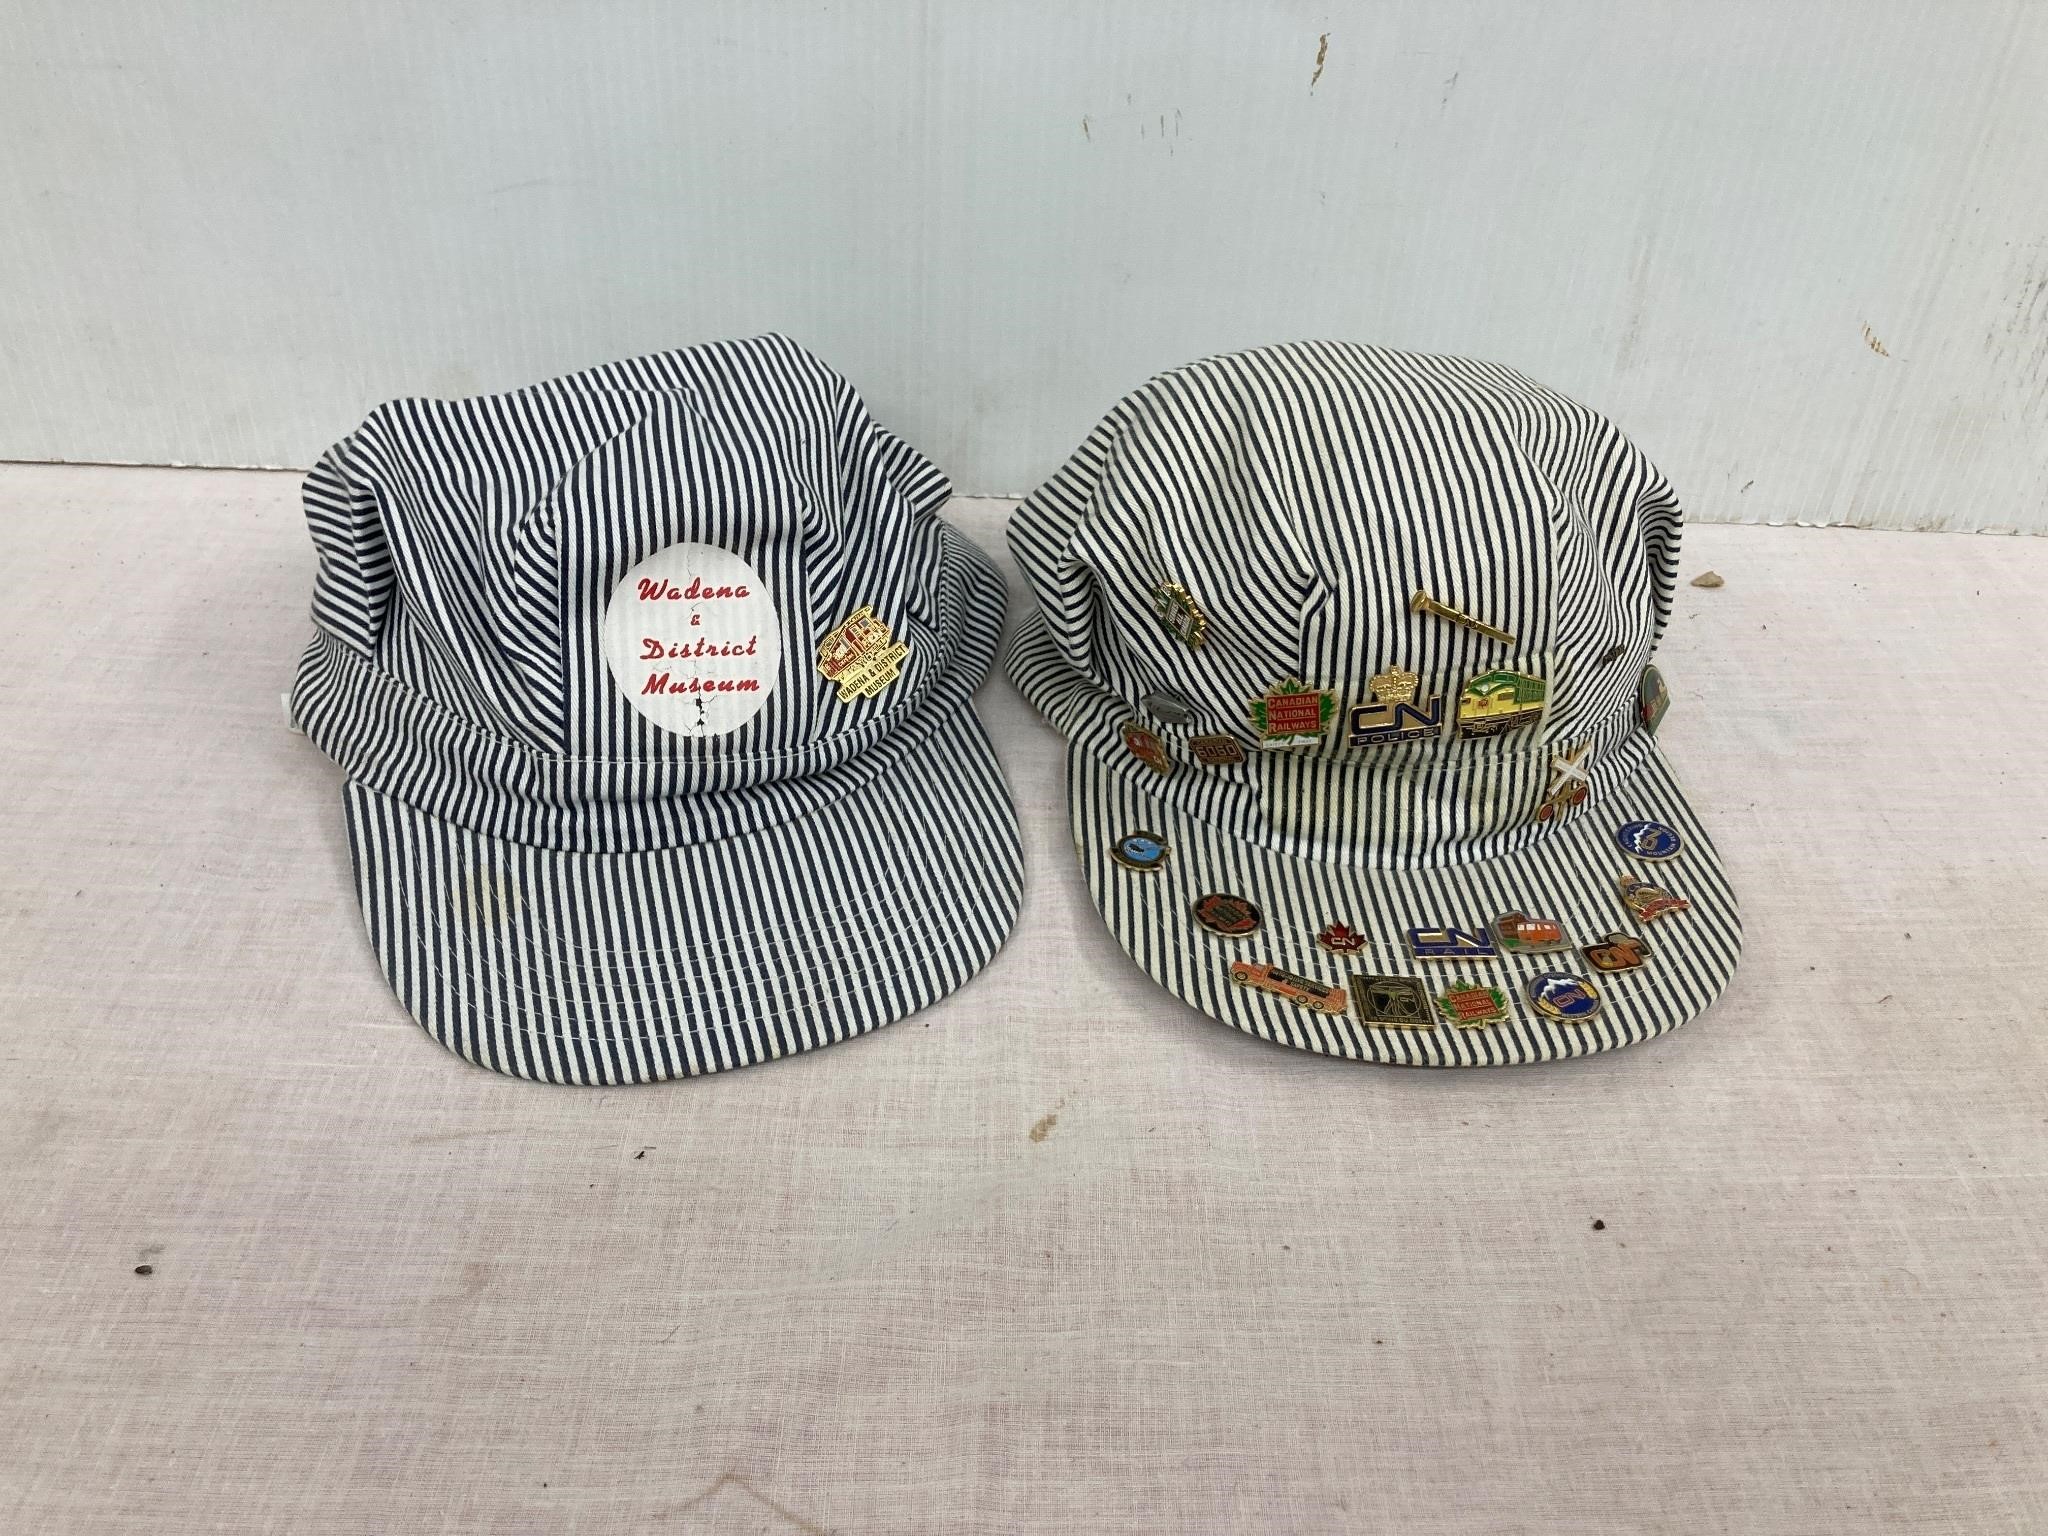 Railroaders hats. With RR pins